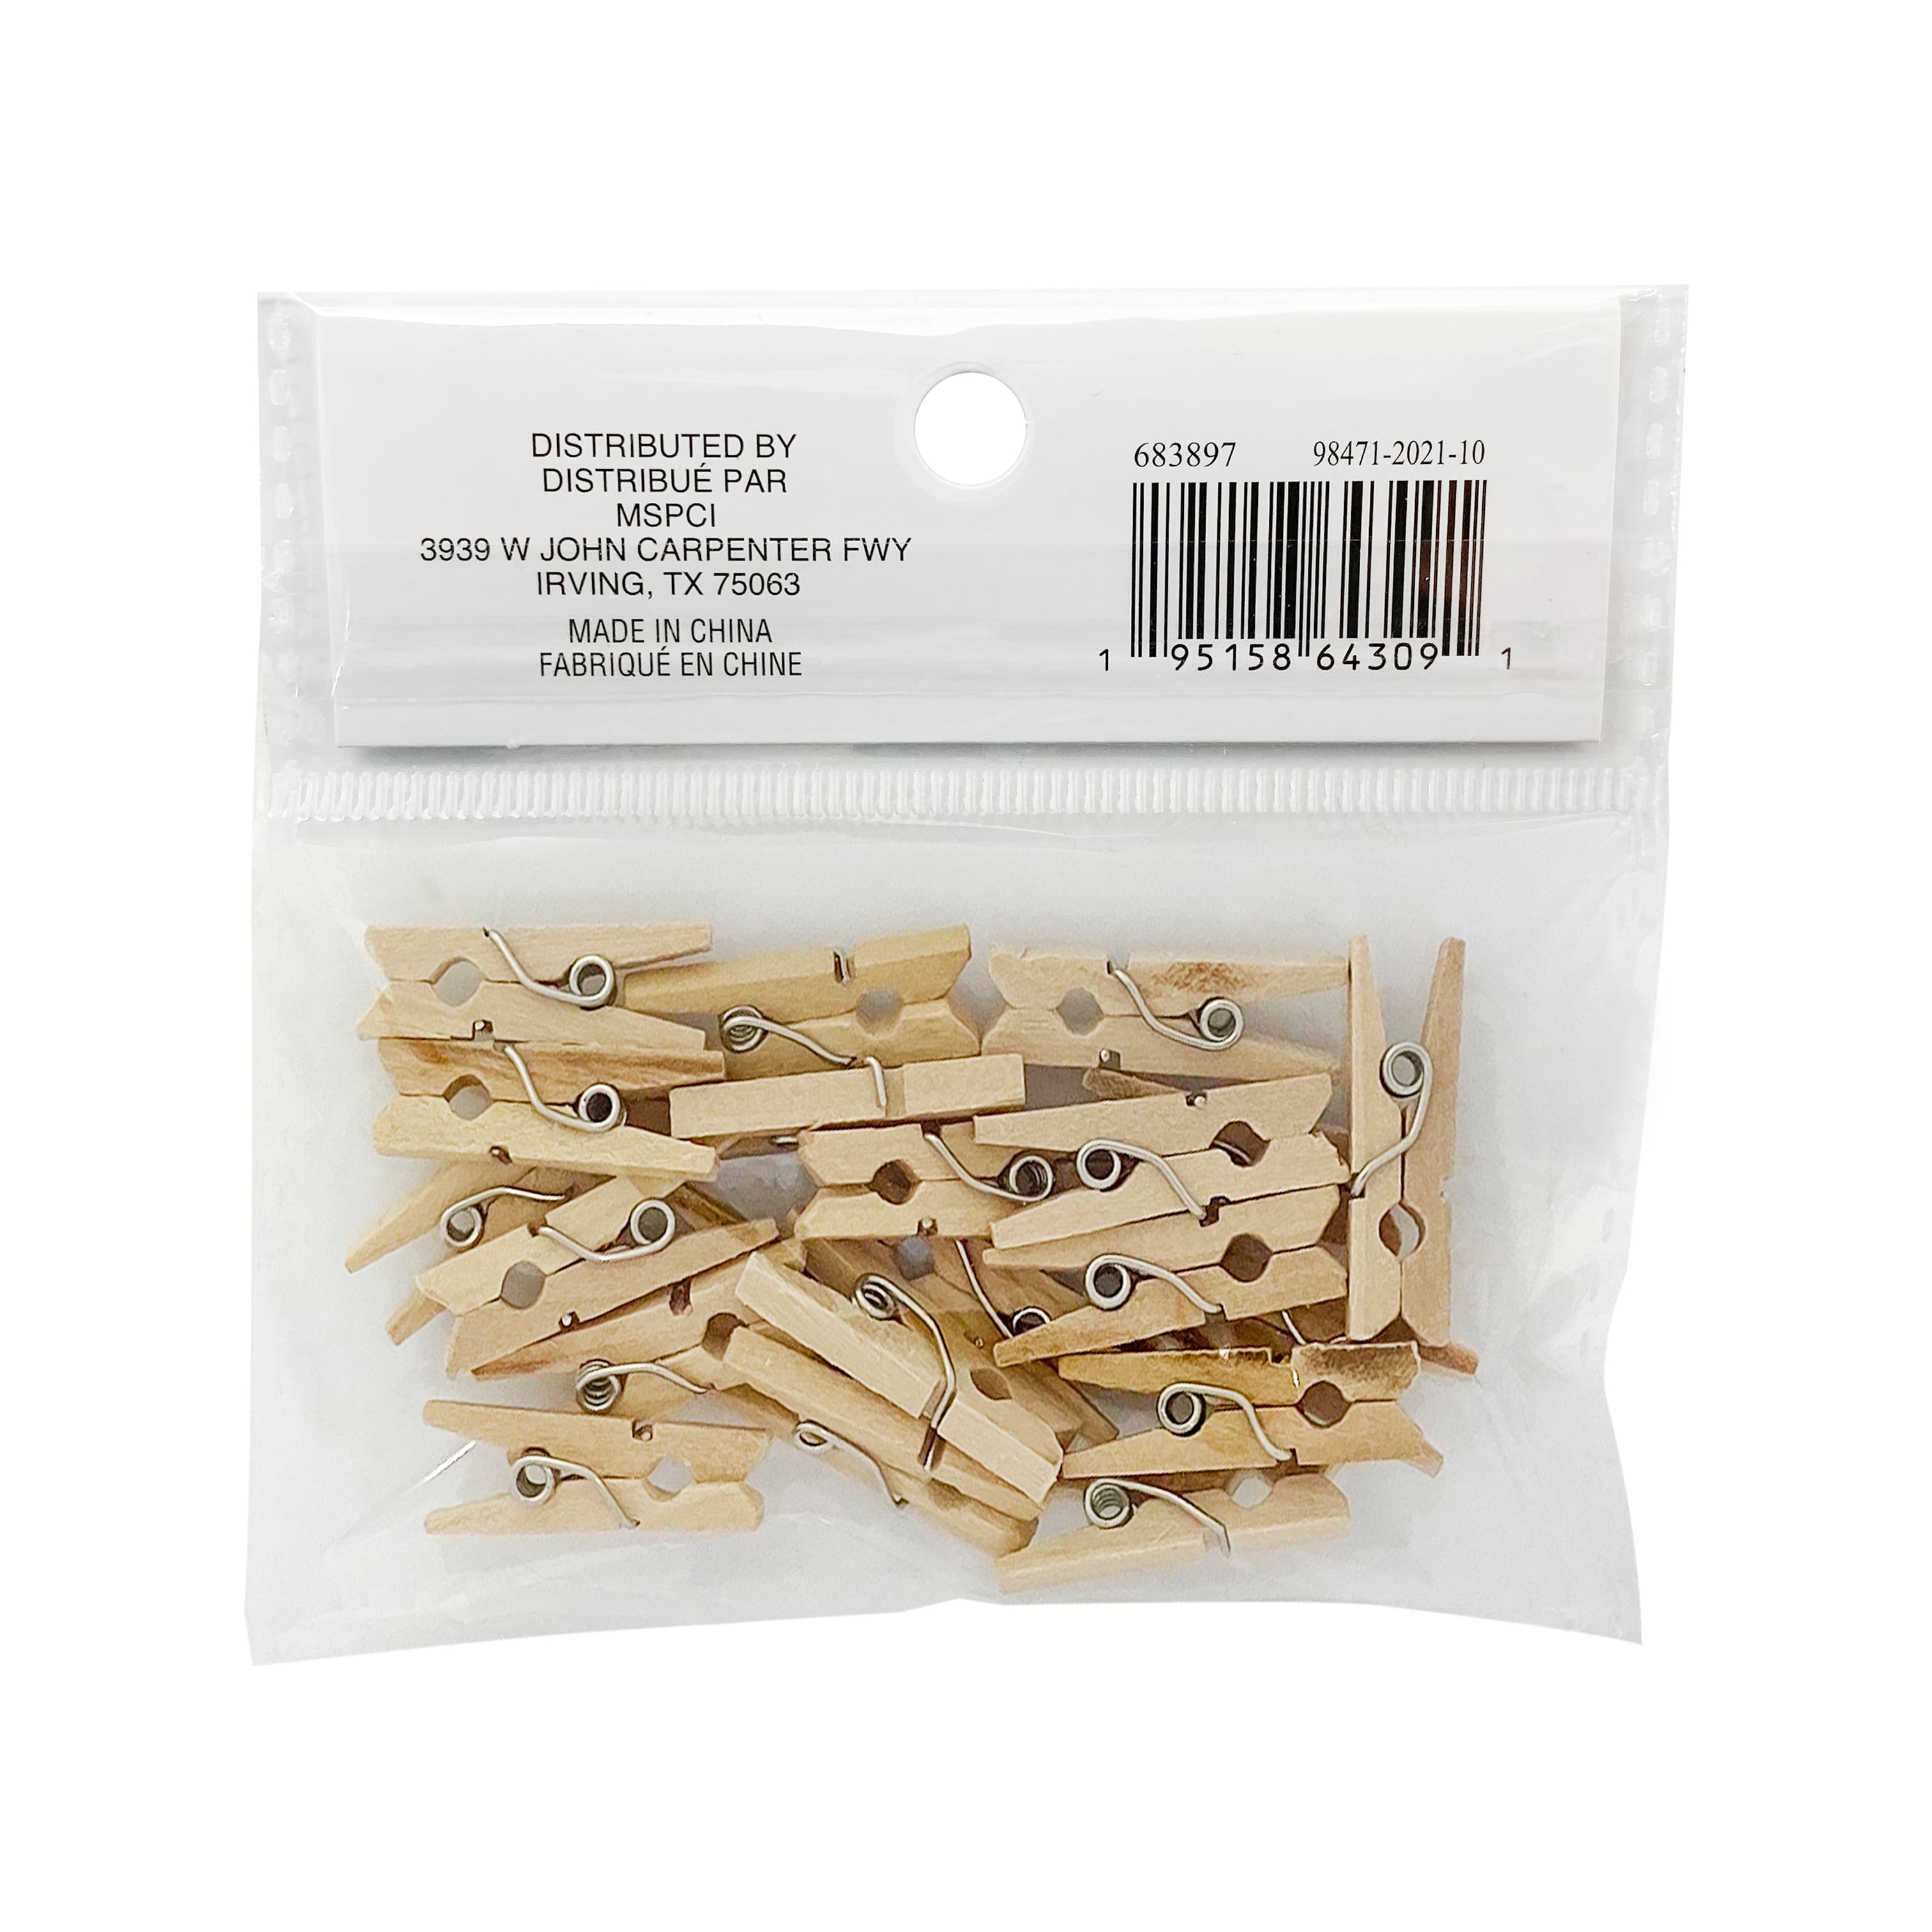 Mini Natural Clothespins by Recollections&#x2122;